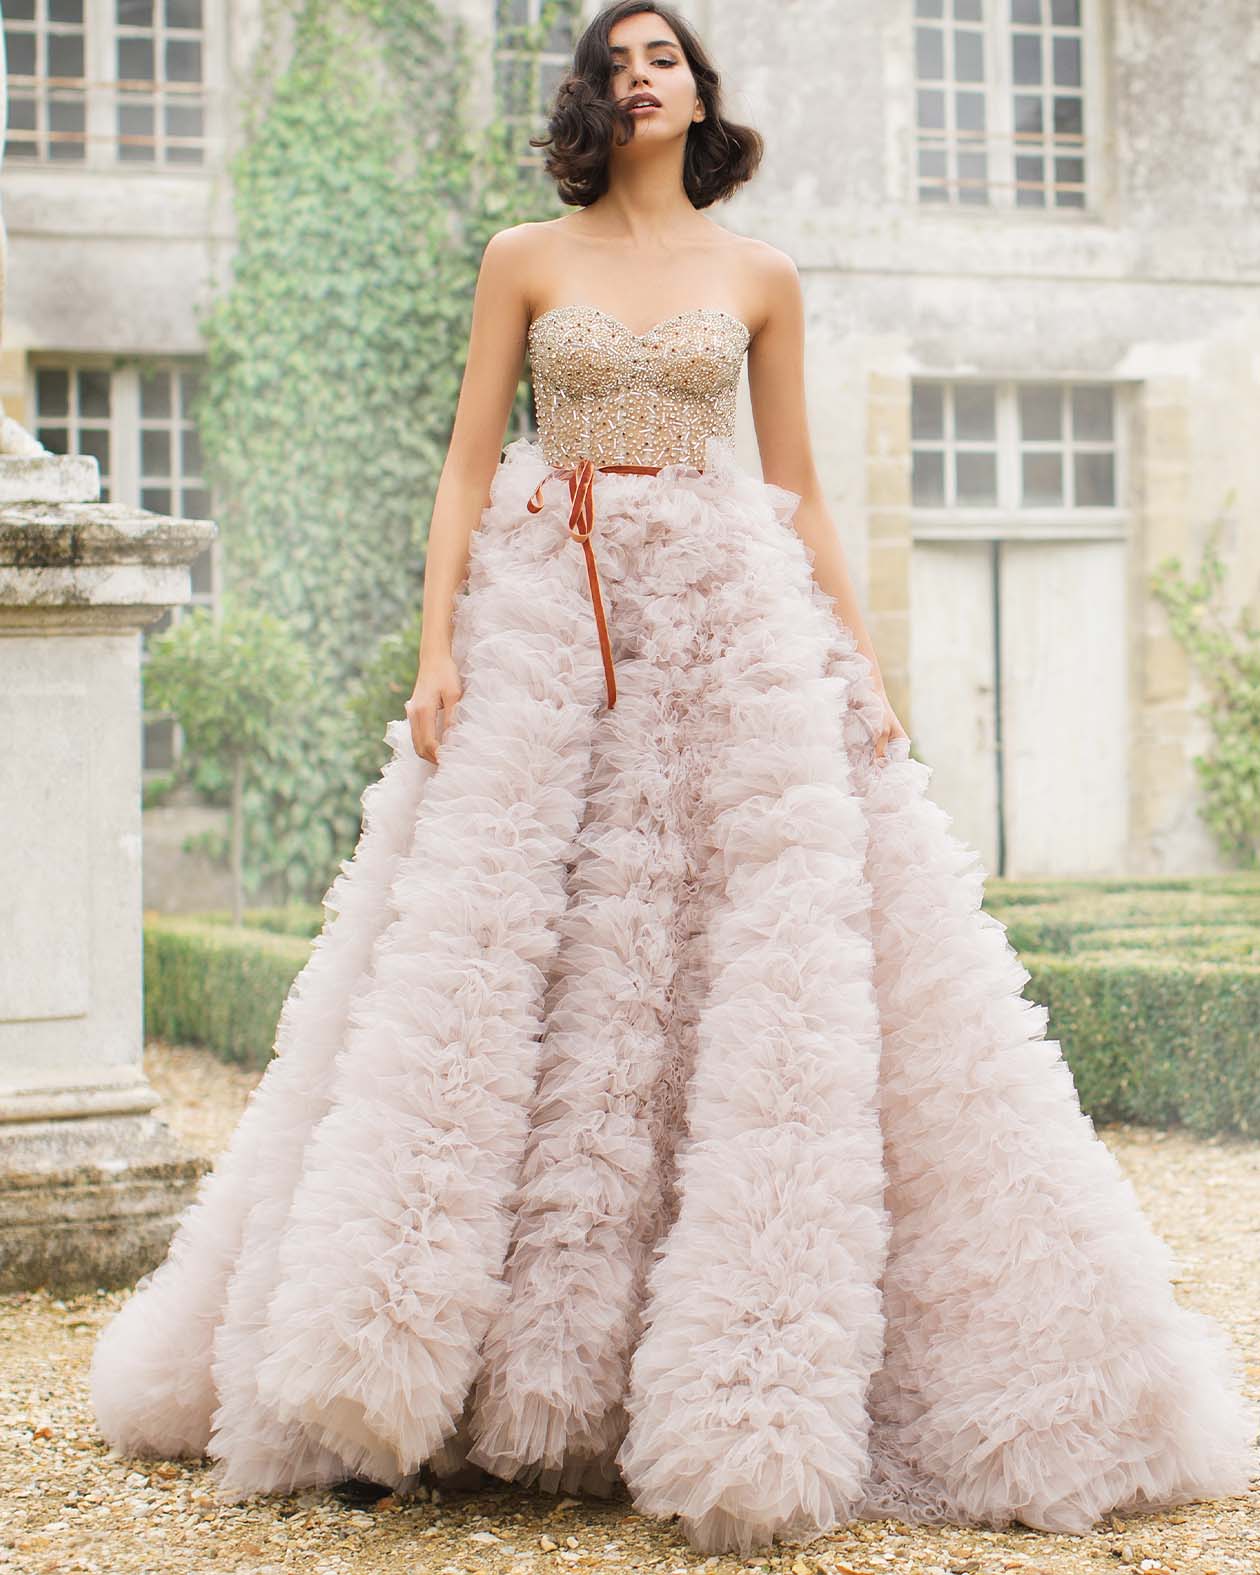 Tulle burst and exquisite embellishments gown